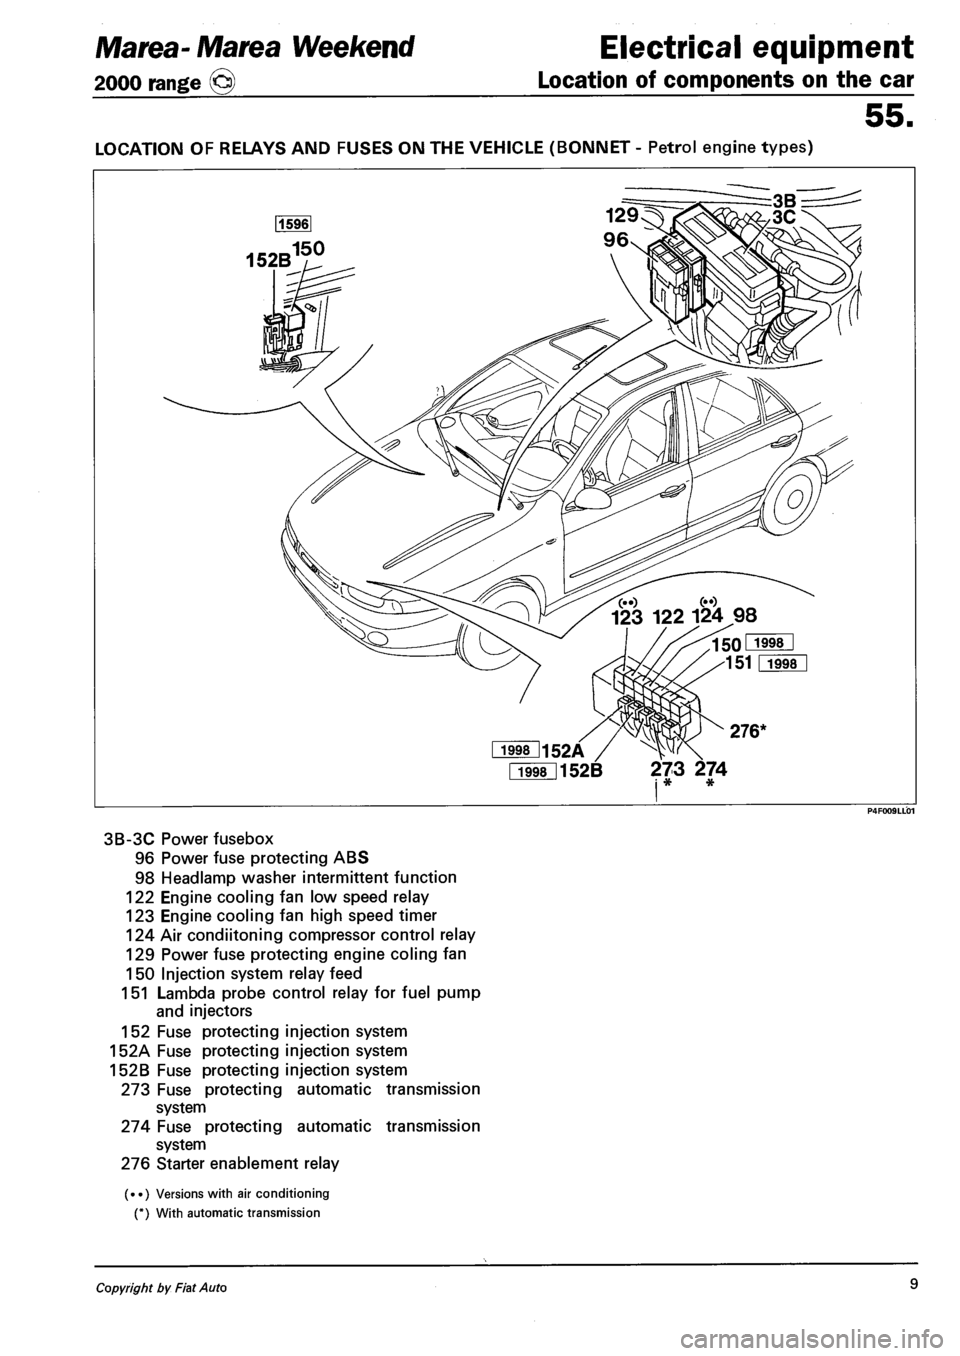 FIAT MAREA 2000 1.G Service Manual Marea-Marea Weekend Electrical equipment 
2000 range (§) Location of components on the car 
55. 
LOCATION OF RELAYS AND FUSES ON THE VEHICLE (BONNET - Petrol engine types) 
Fi998l152B 273 274 i * * 
